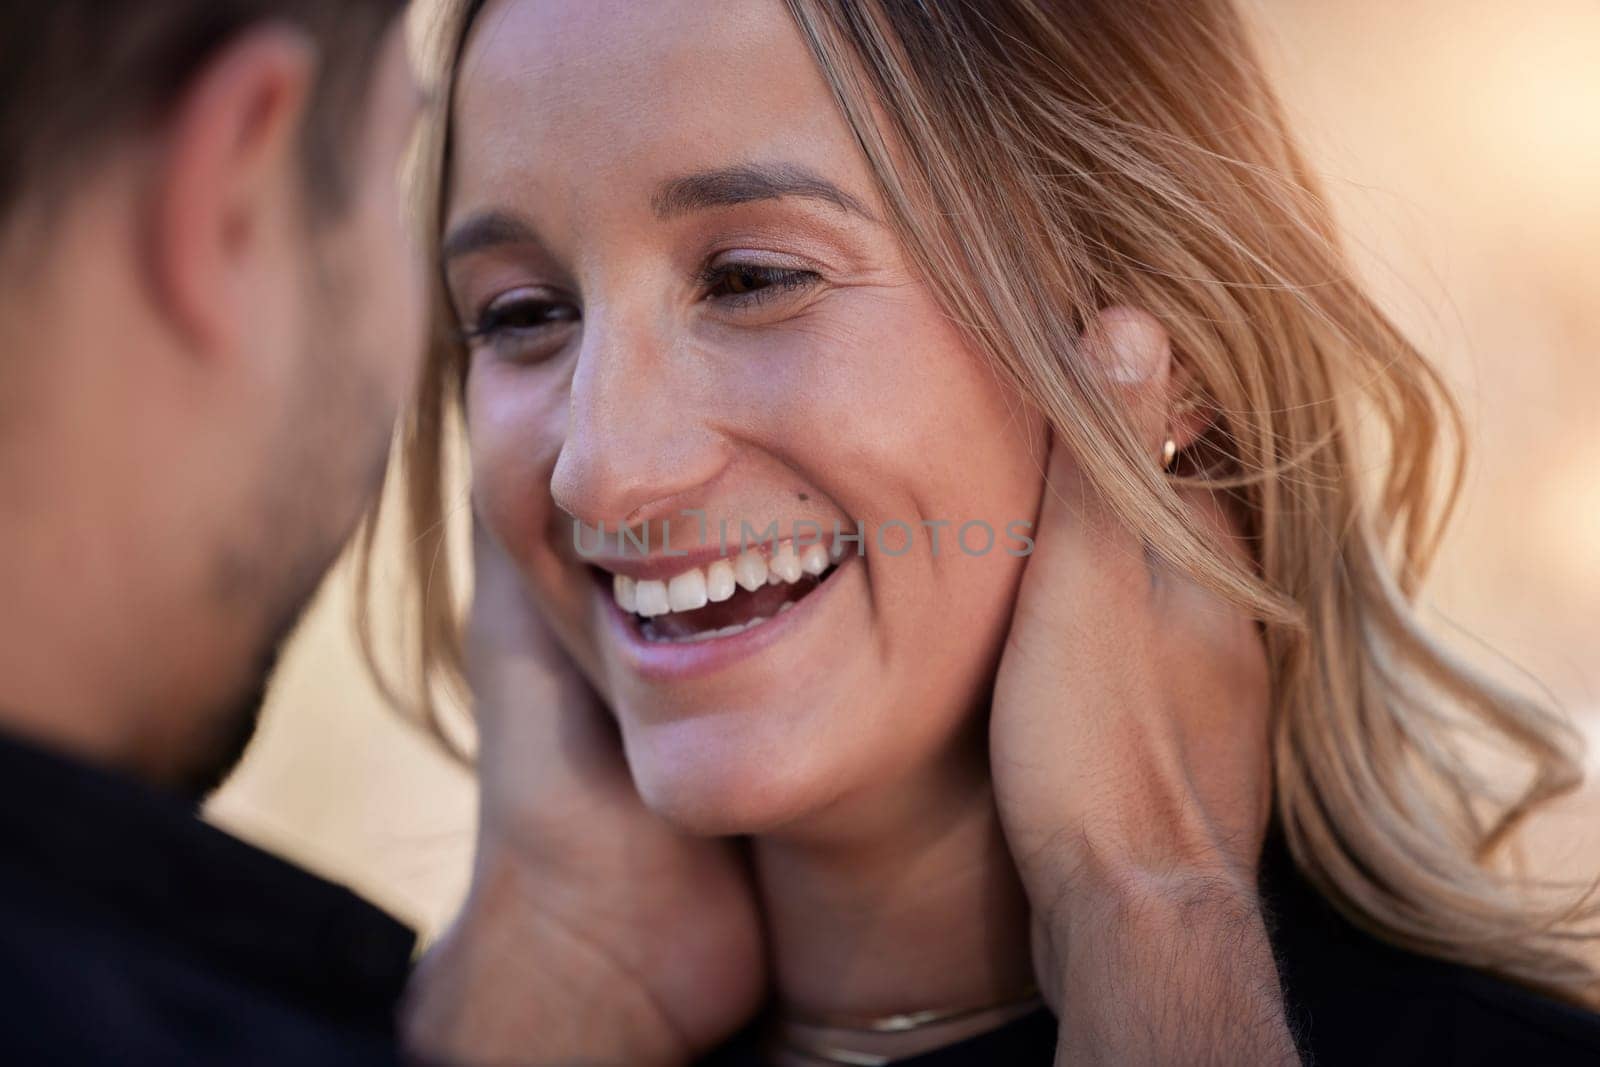 Love, happy and woman looking at her boyfriend while on romantic date for valentines day. Happiness, smile and man holding the face of girlfriend to bond with intimacy, affection and romance outdoors.